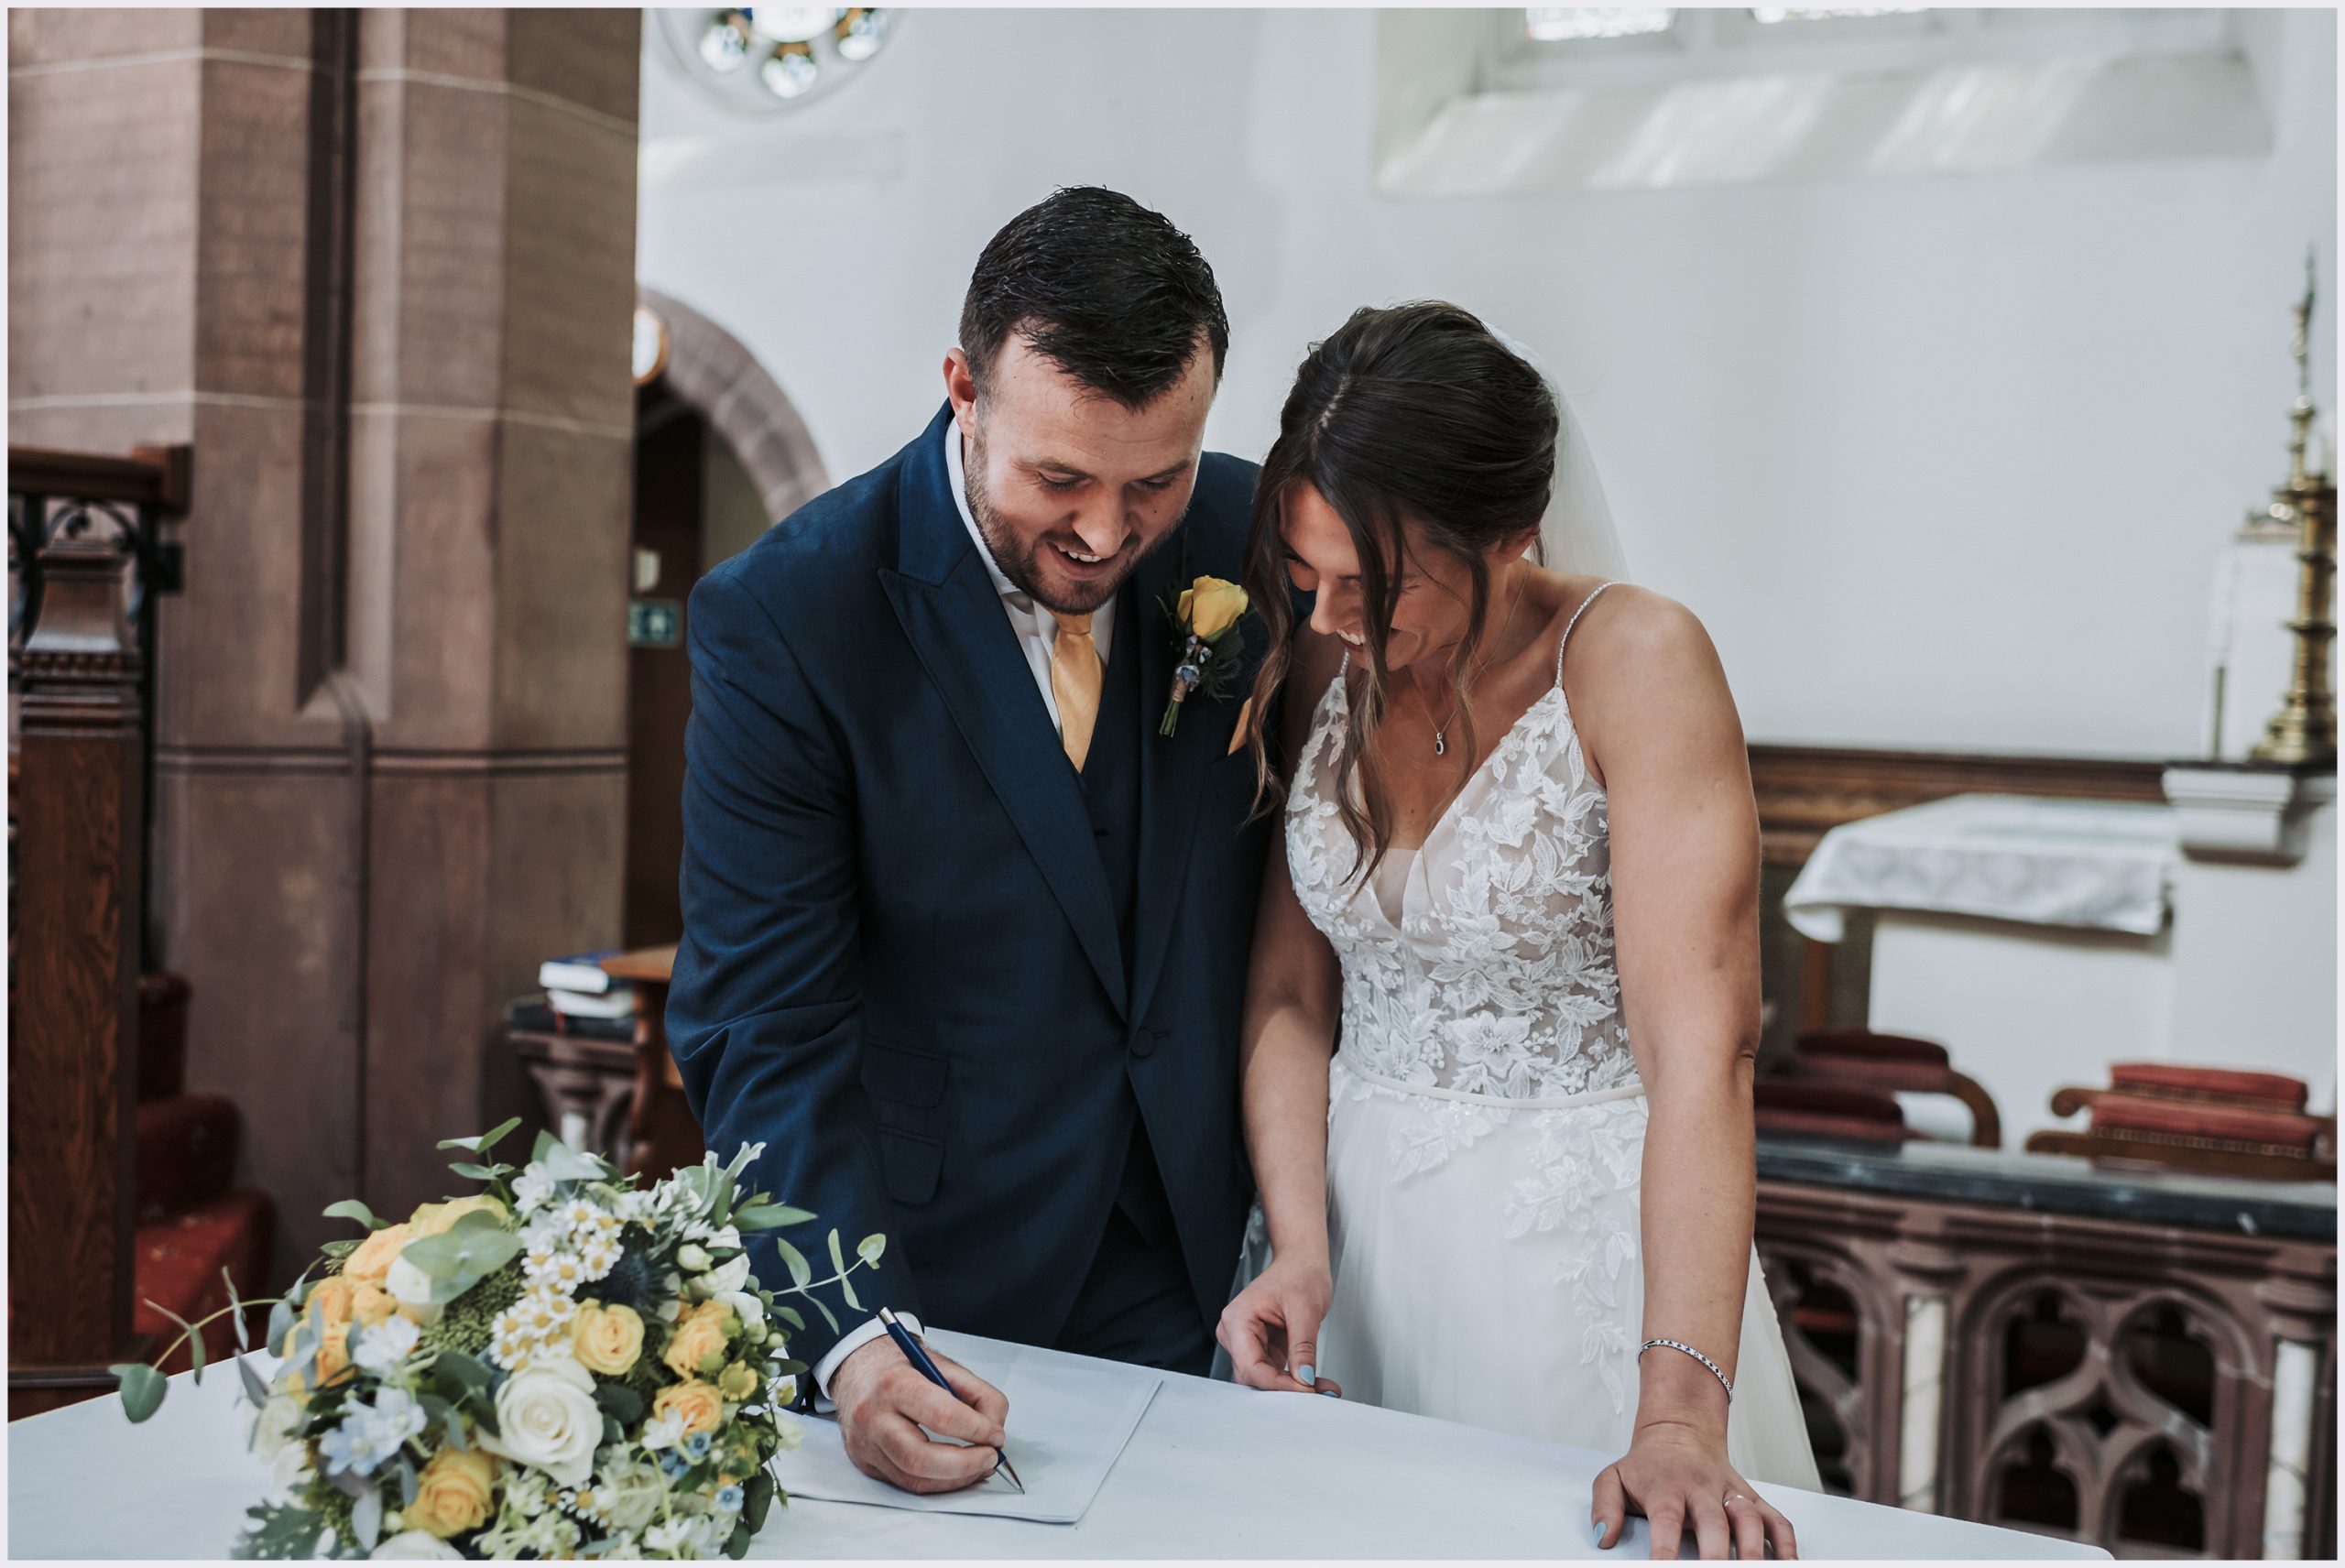 A bride and groom look down smiling the register as they sign after their church wedding ceremony in Chester